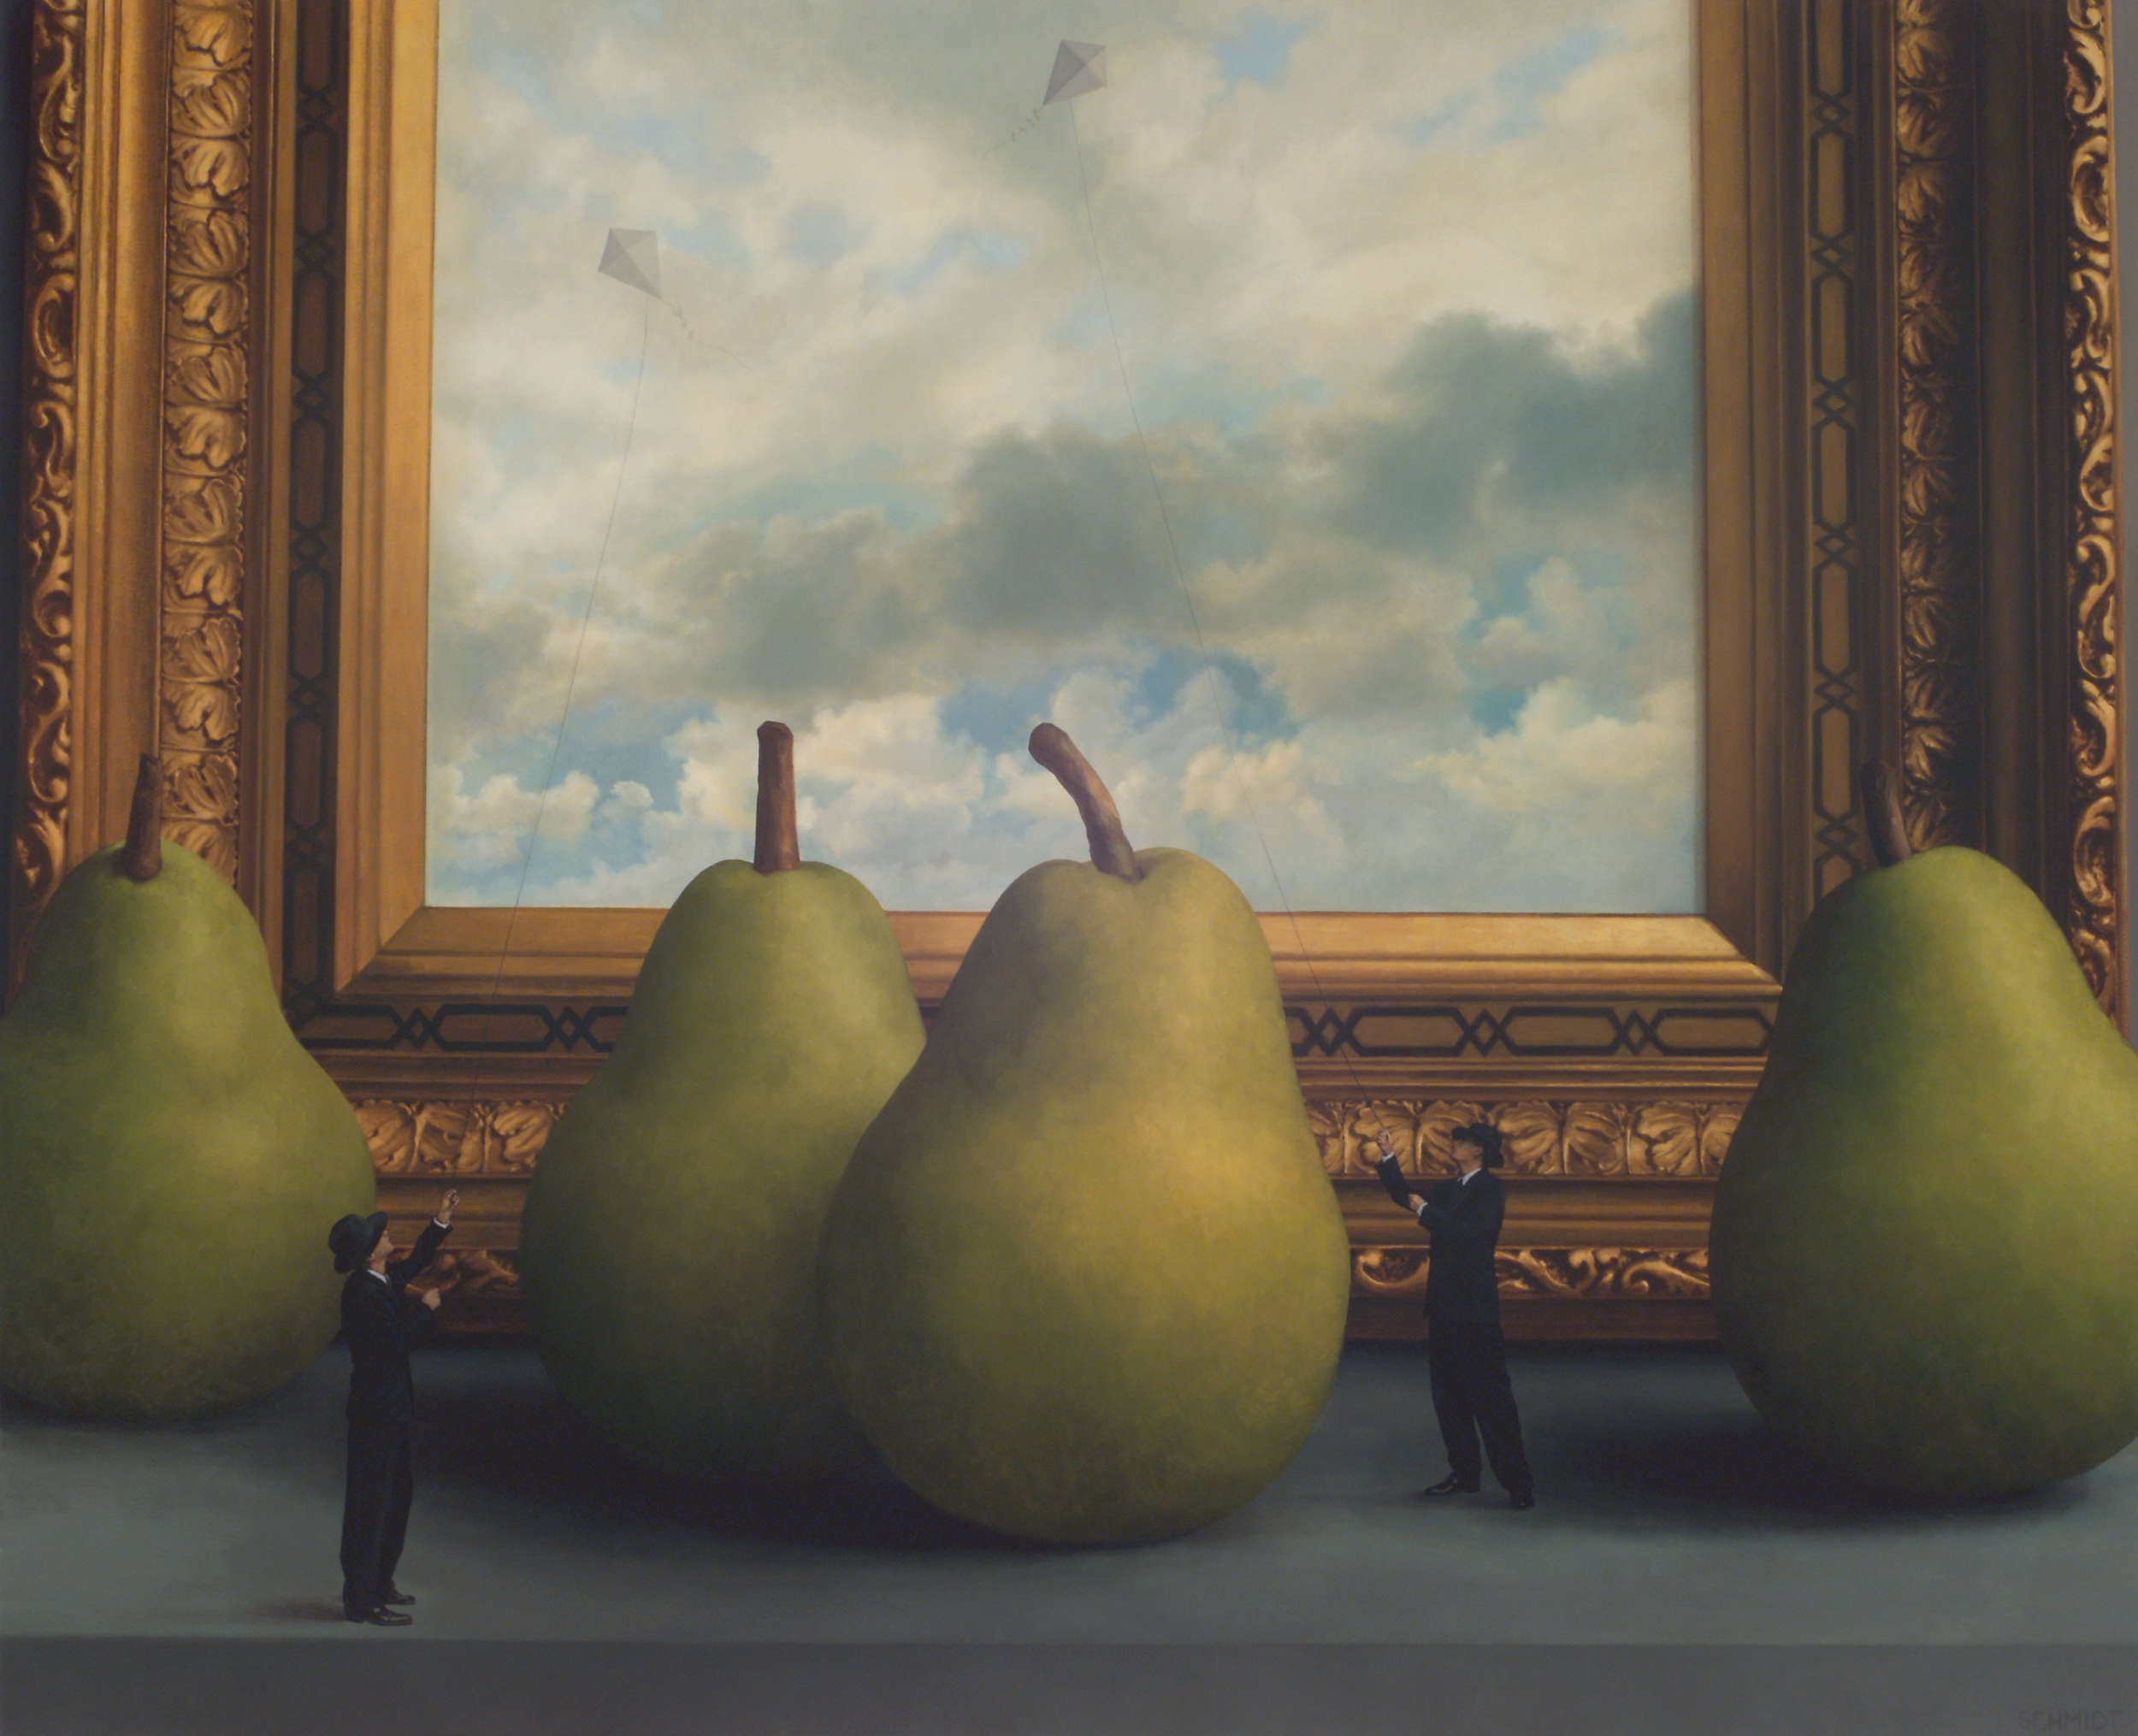 Giant gold carved frame, giant green pears, stormy sky inside frame, diminutive male figures wearing black suits and fedora hats flying kites